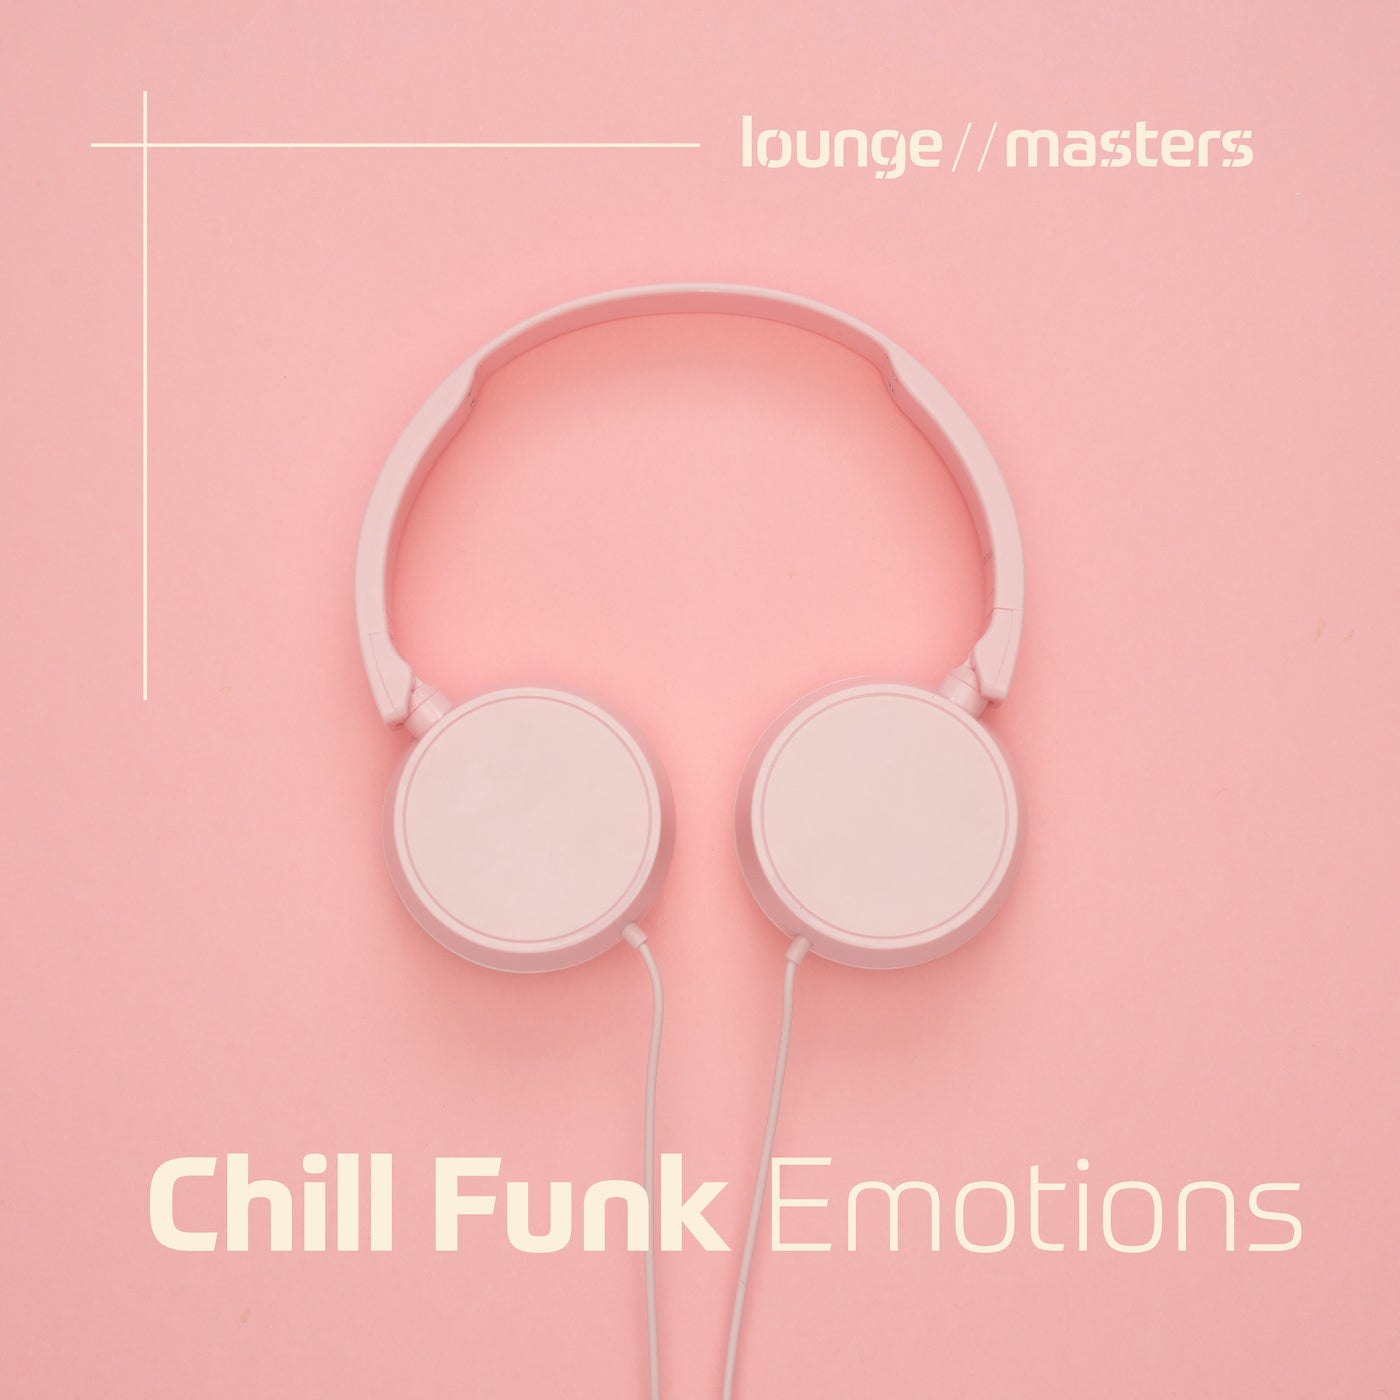 Chill Funk Emotions